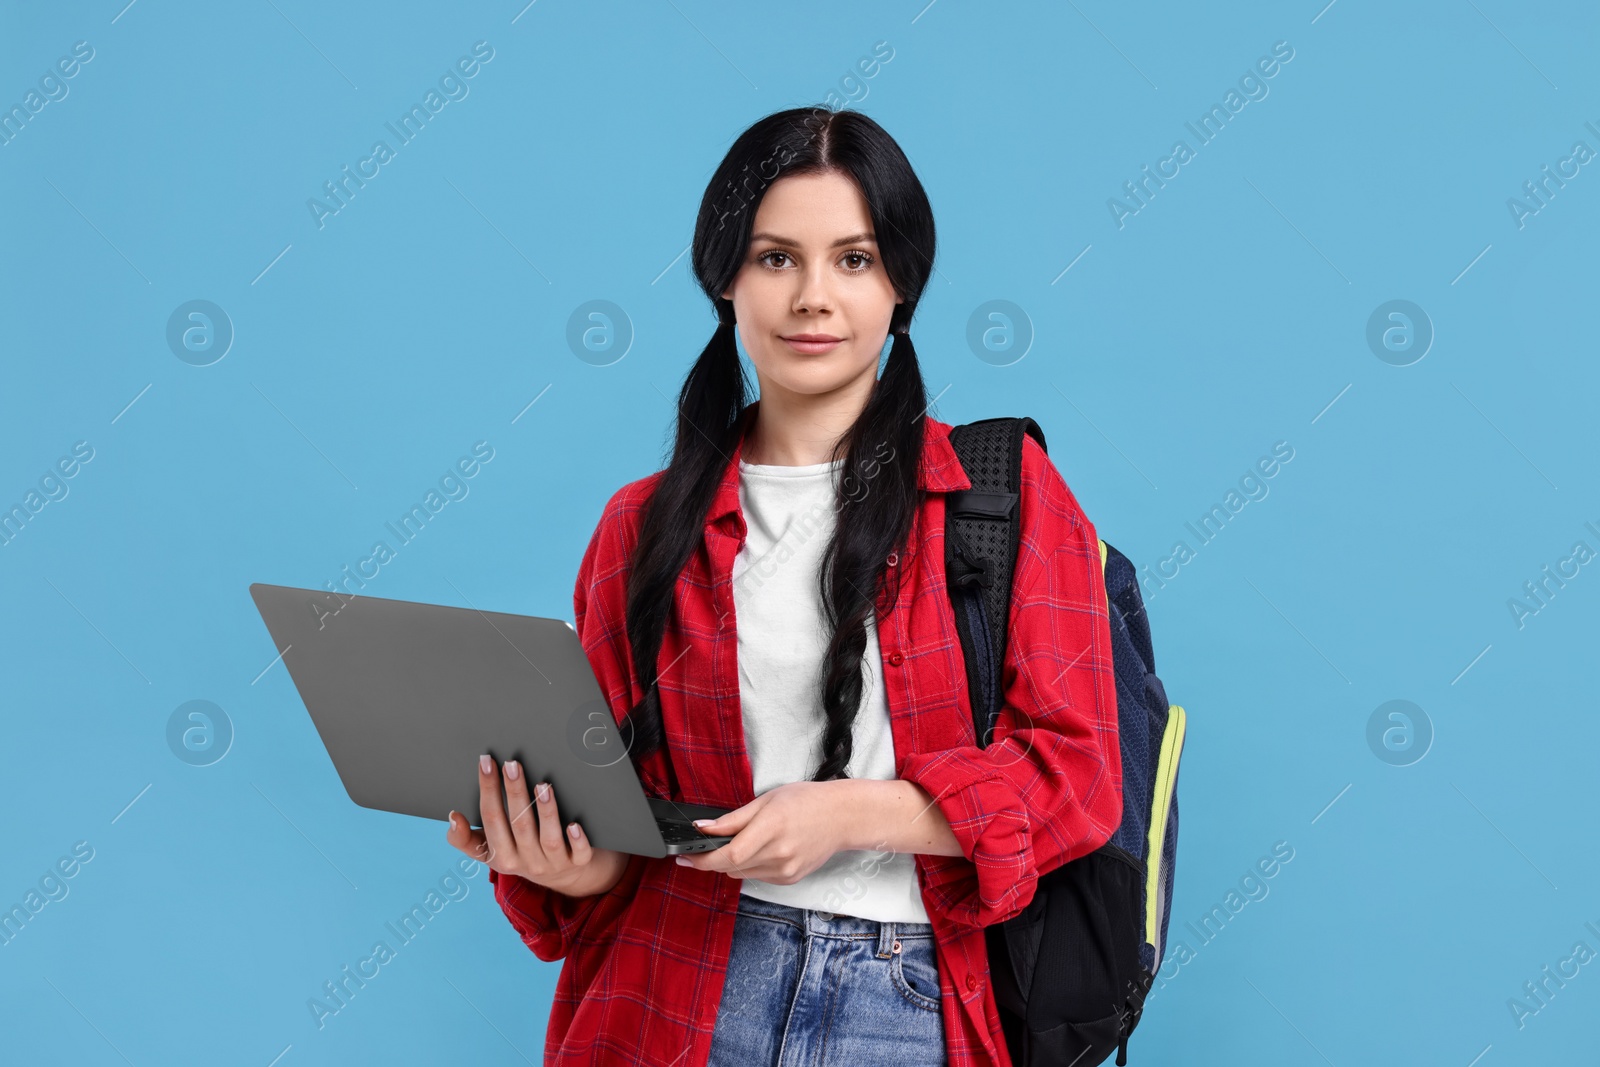 Photo of Student with laptop on light blue background